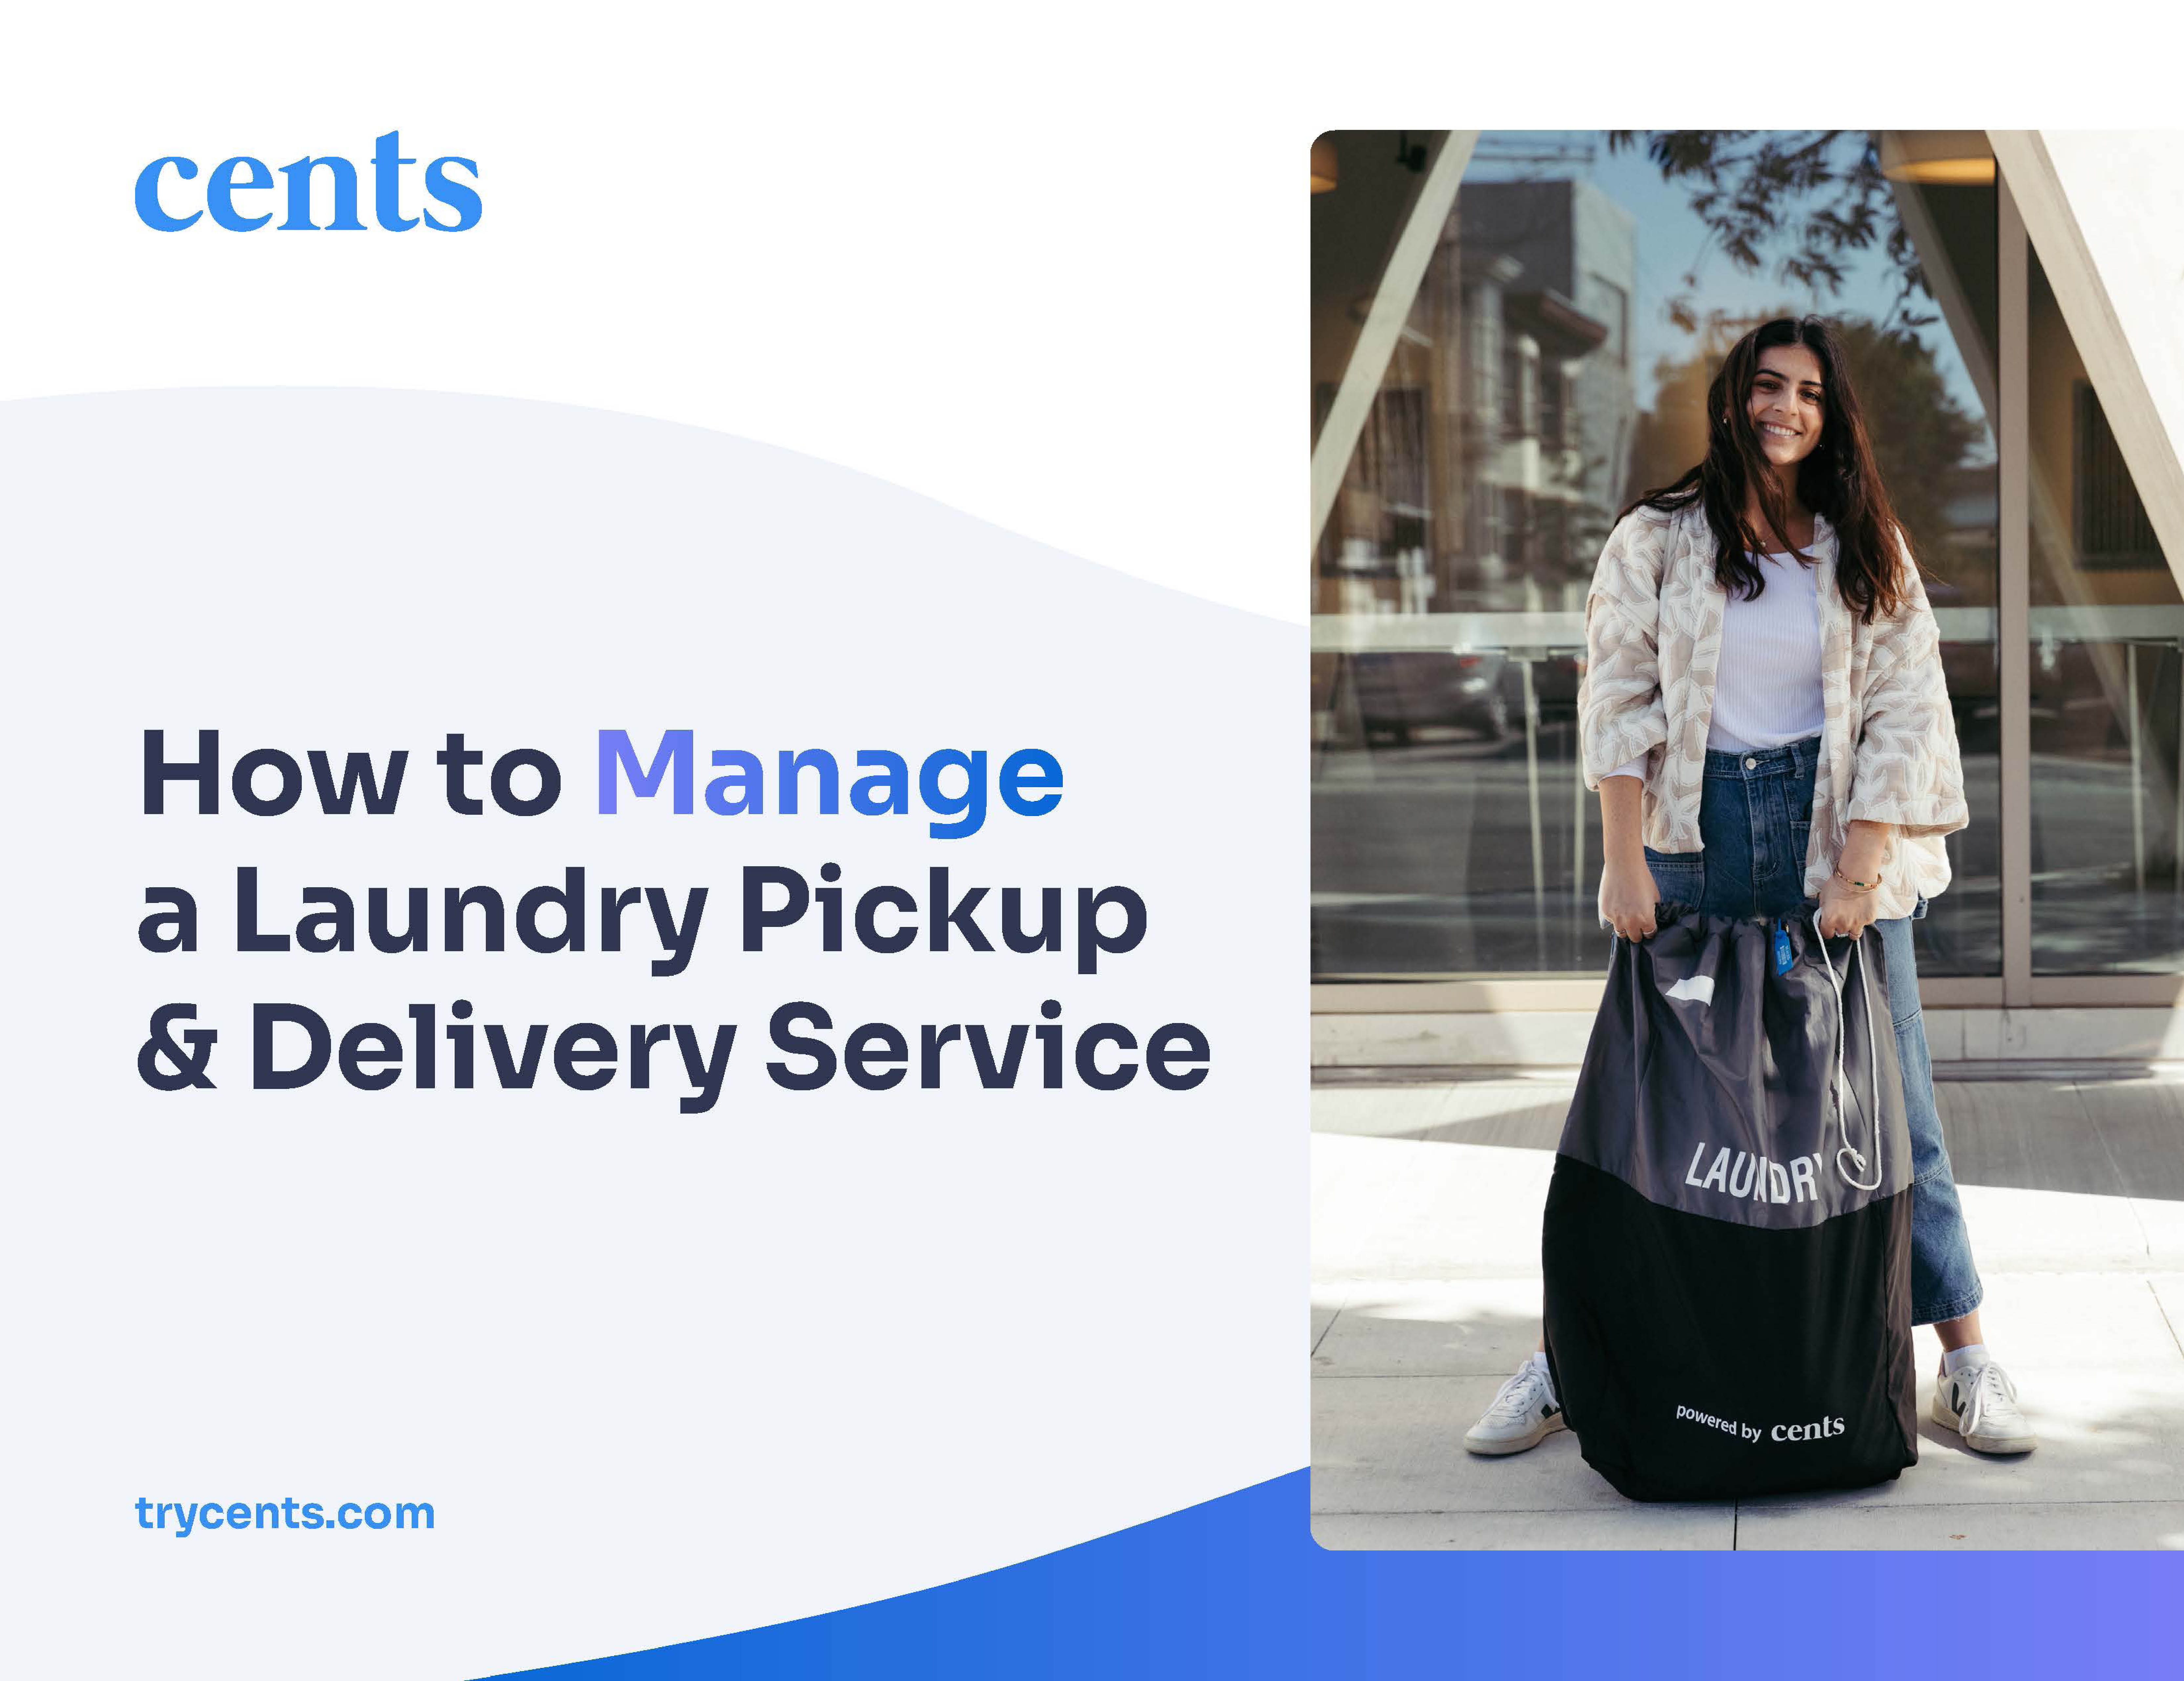 How to Manage a Laundry Pickup and Delivery Service